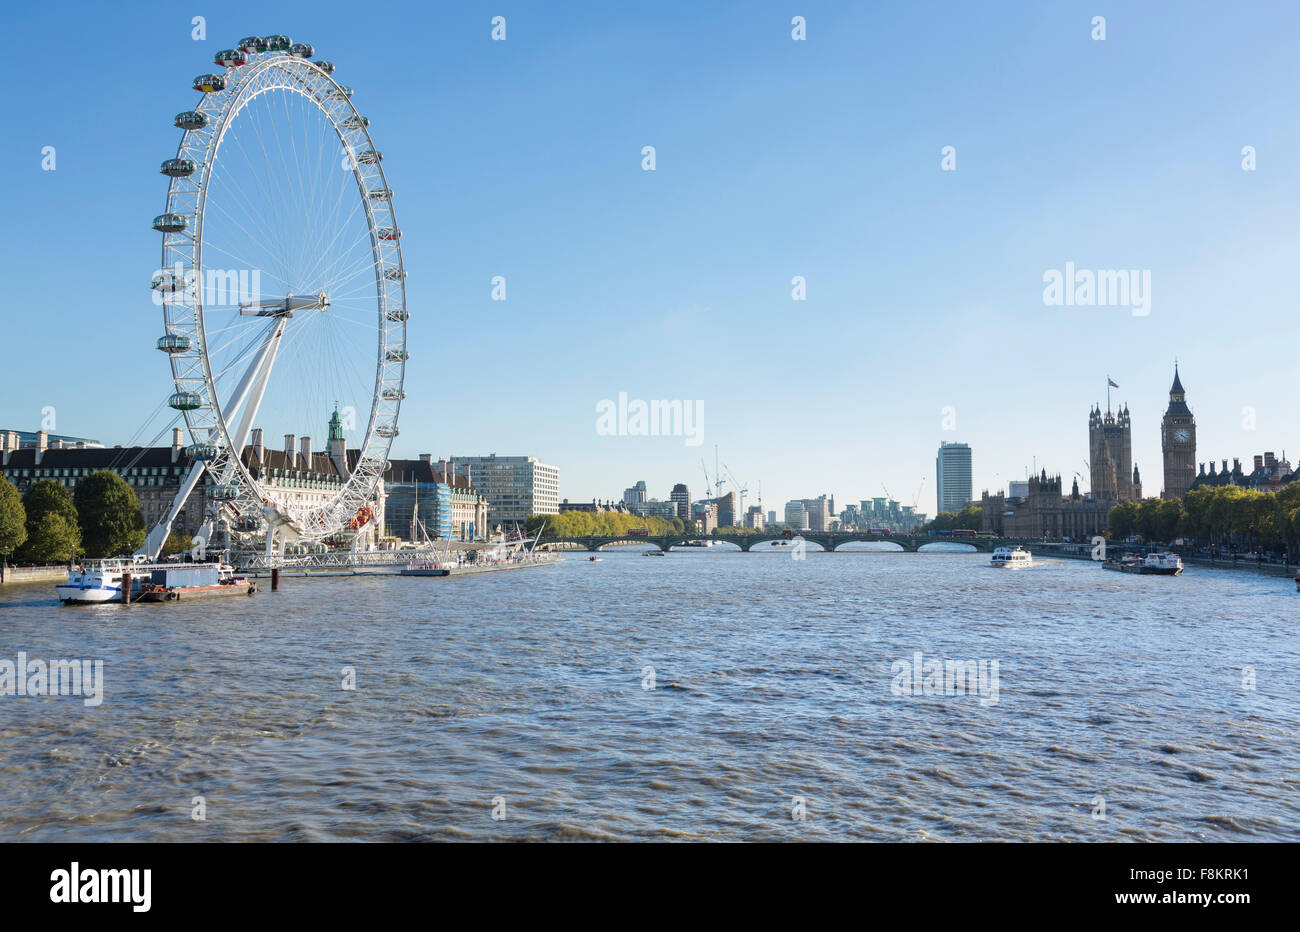 London Eye or Millennium Wheel on South Bank of River Thames in London England Stock Photo